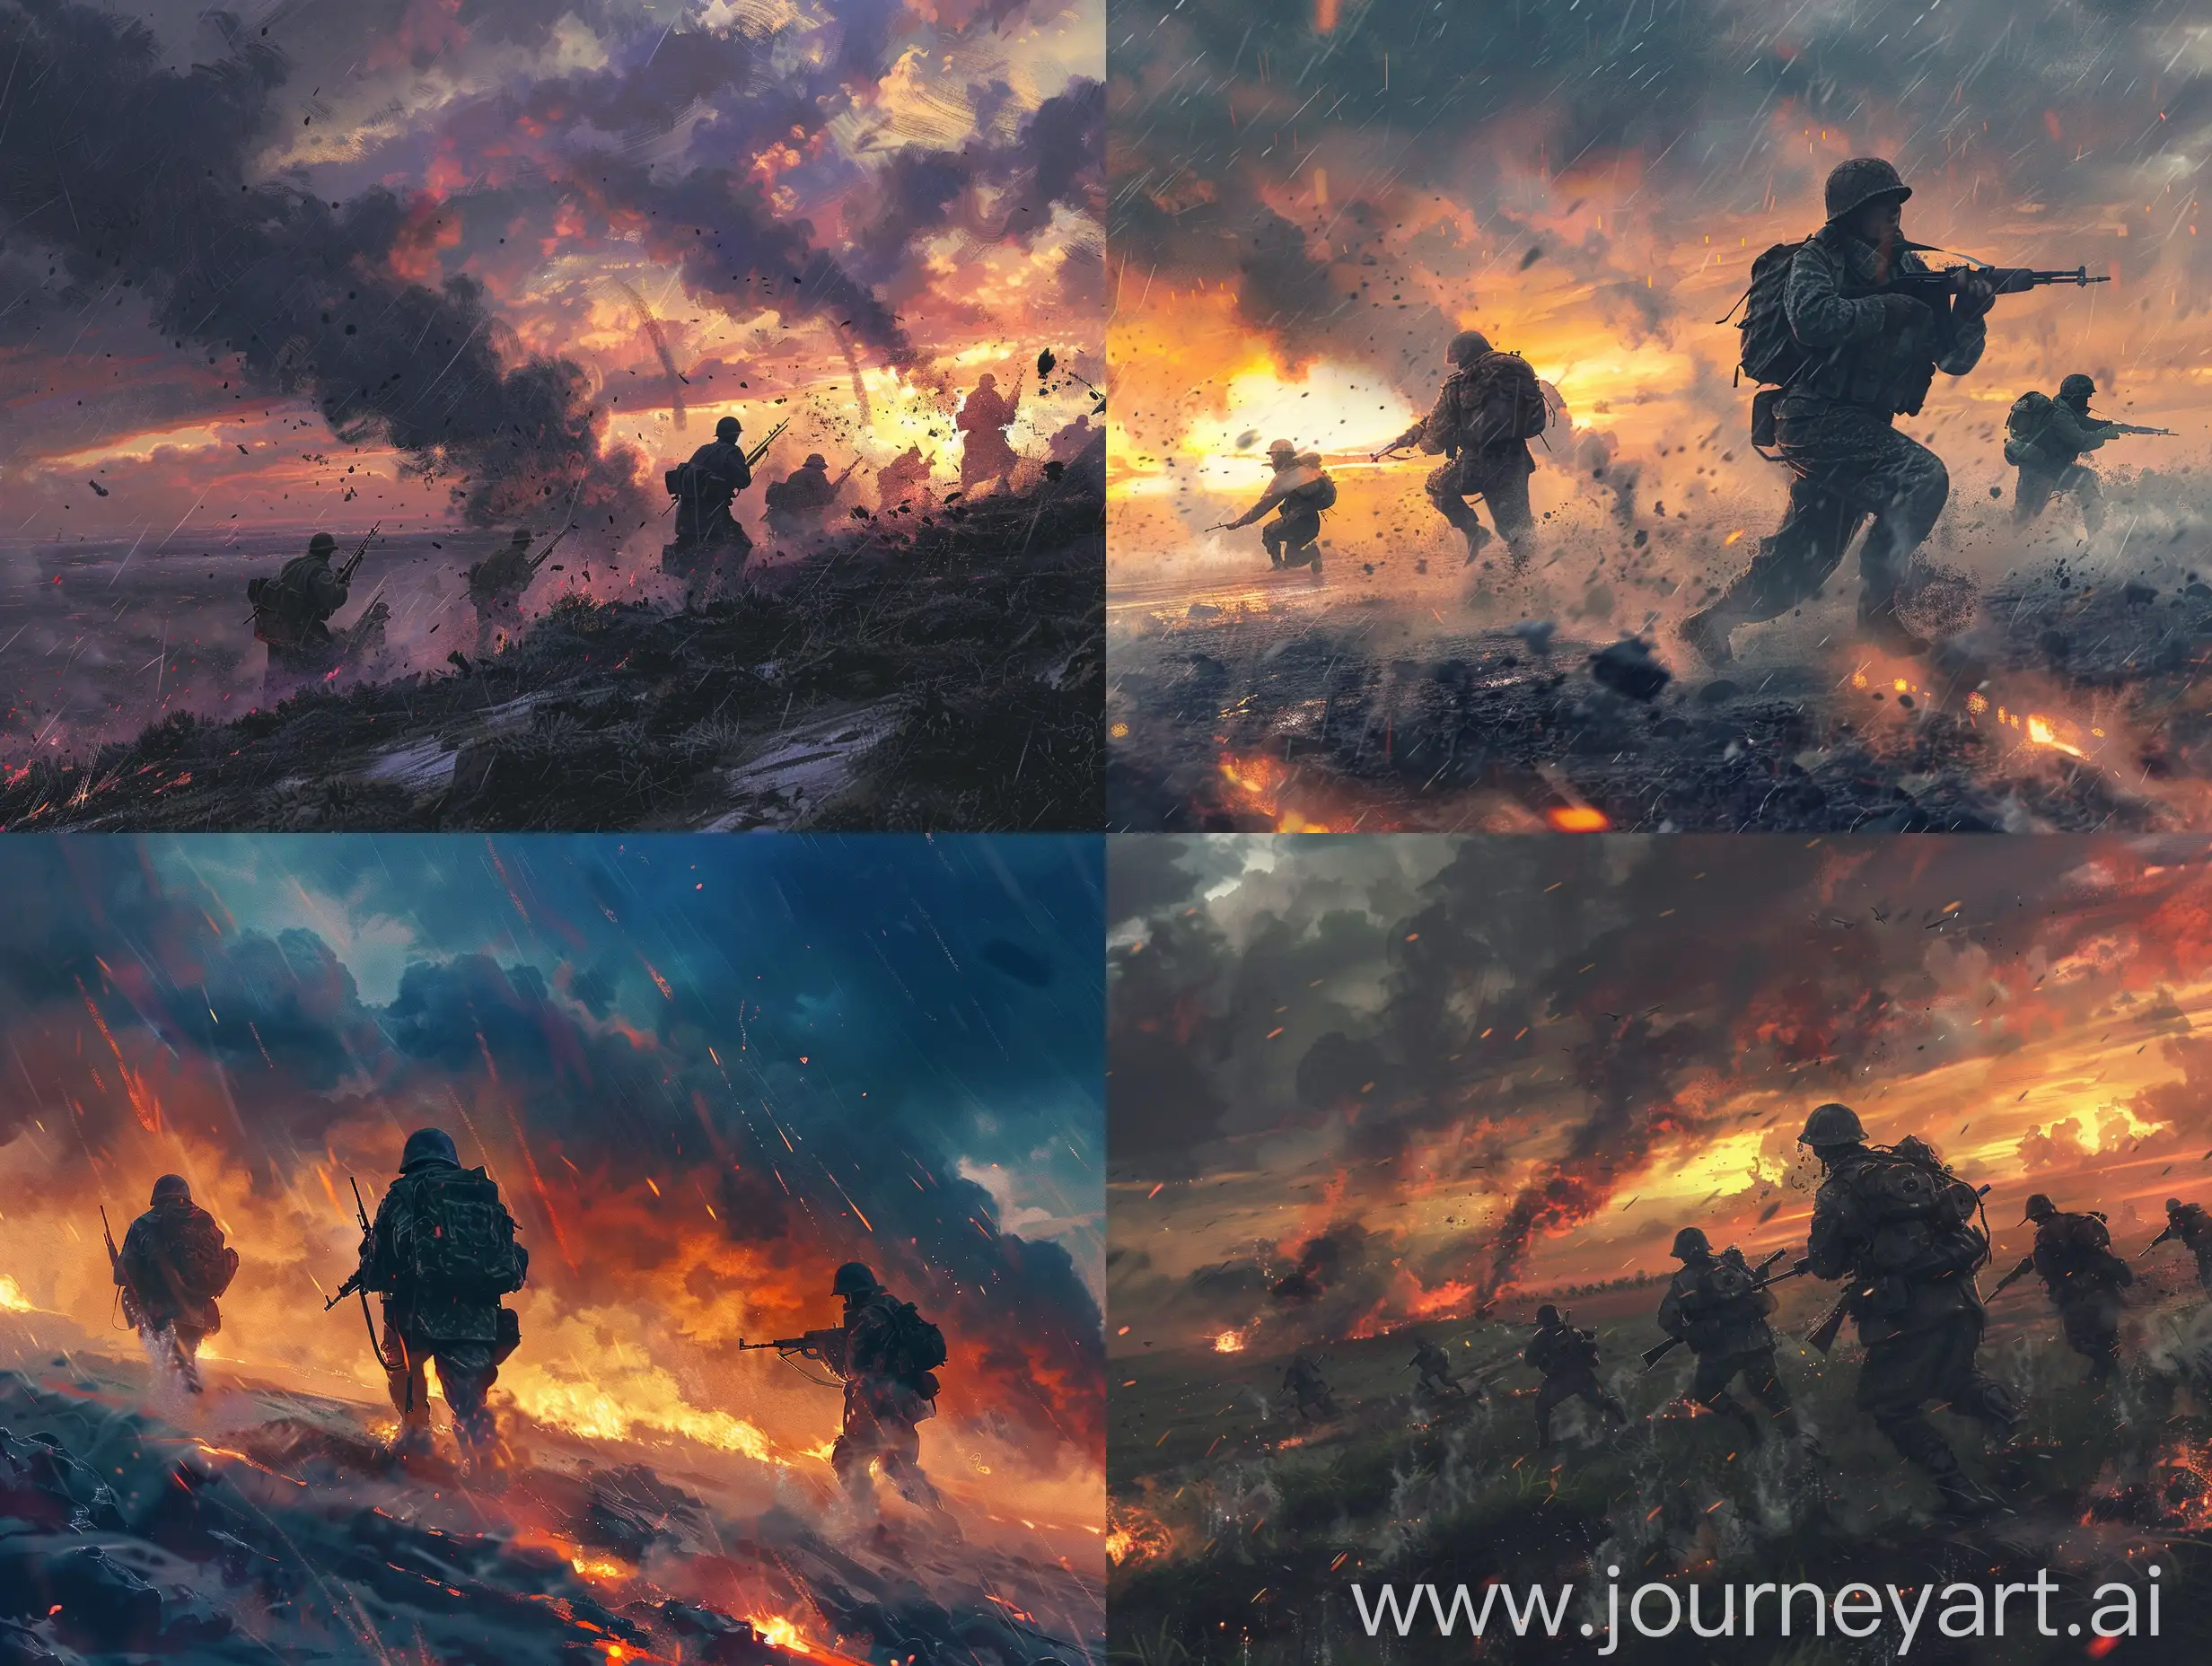 Russian-Army-Soldiers-Troops-in-Battle-at-Dawn-Amidst-Stormy-Clouds